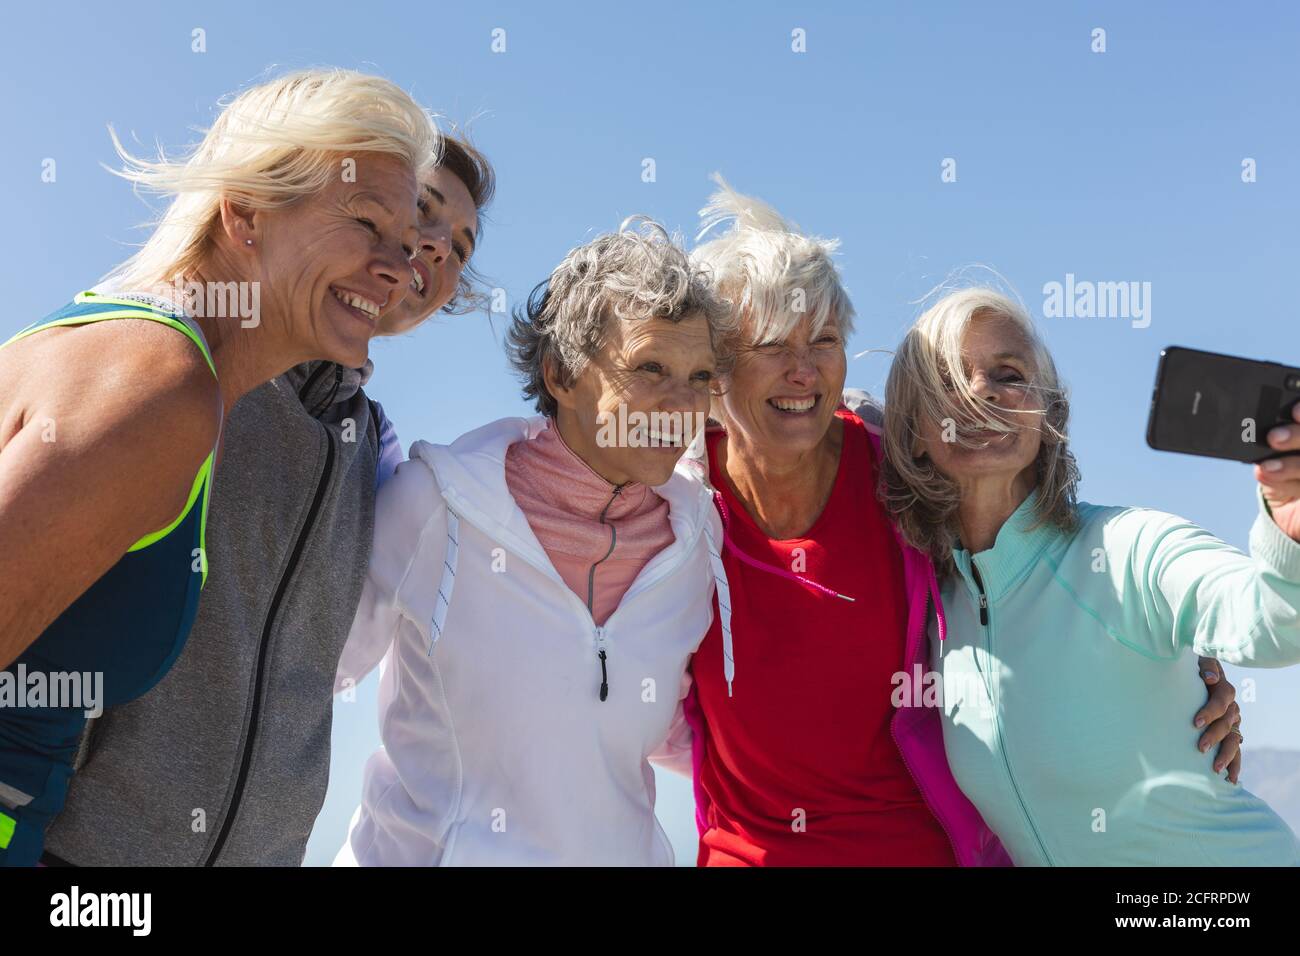 Group of woman taking a selfie Stock Photo